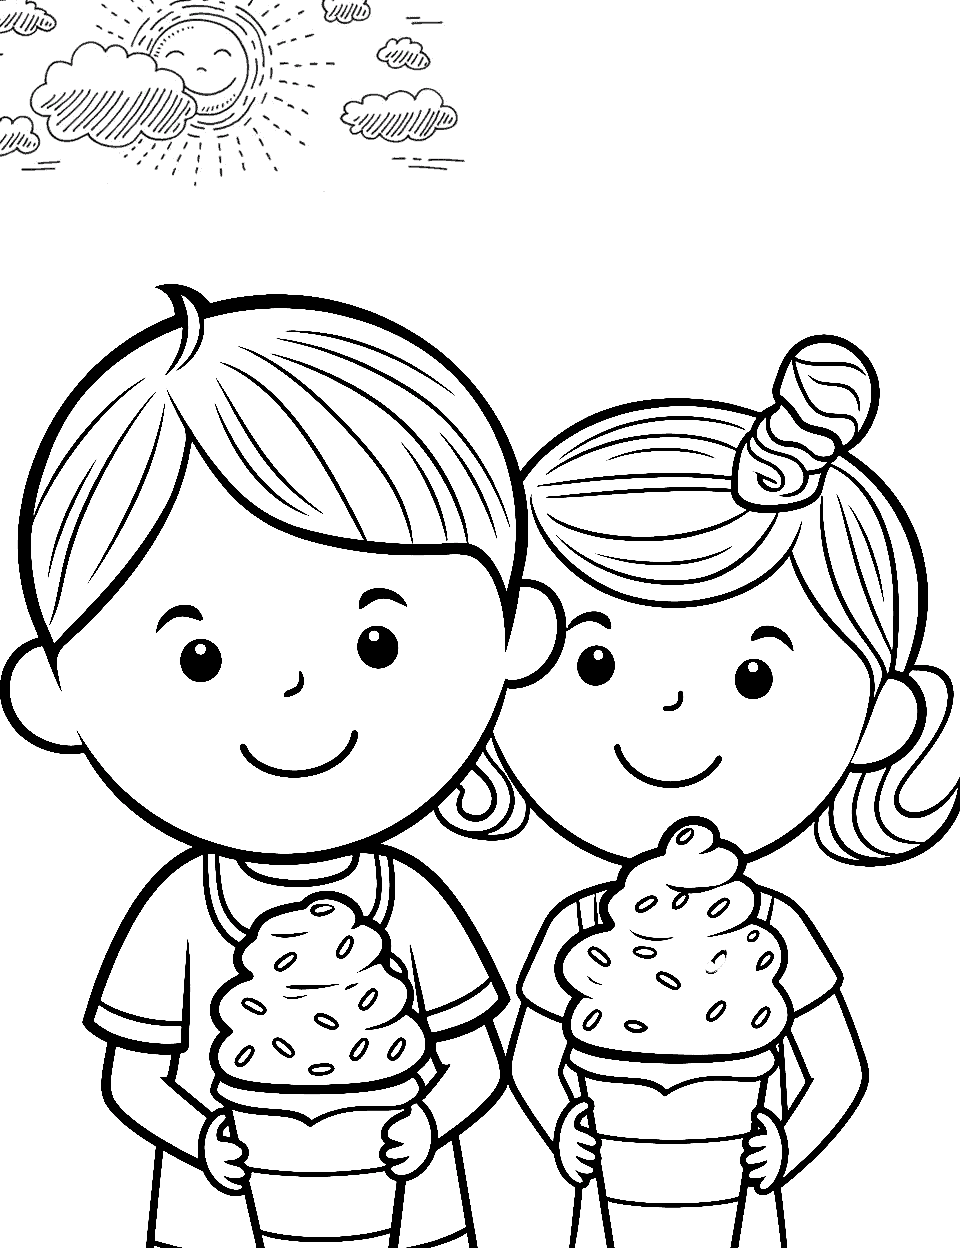 Fun With Ice Cream Food Coloring Page - Kids with ice creams in the summer.